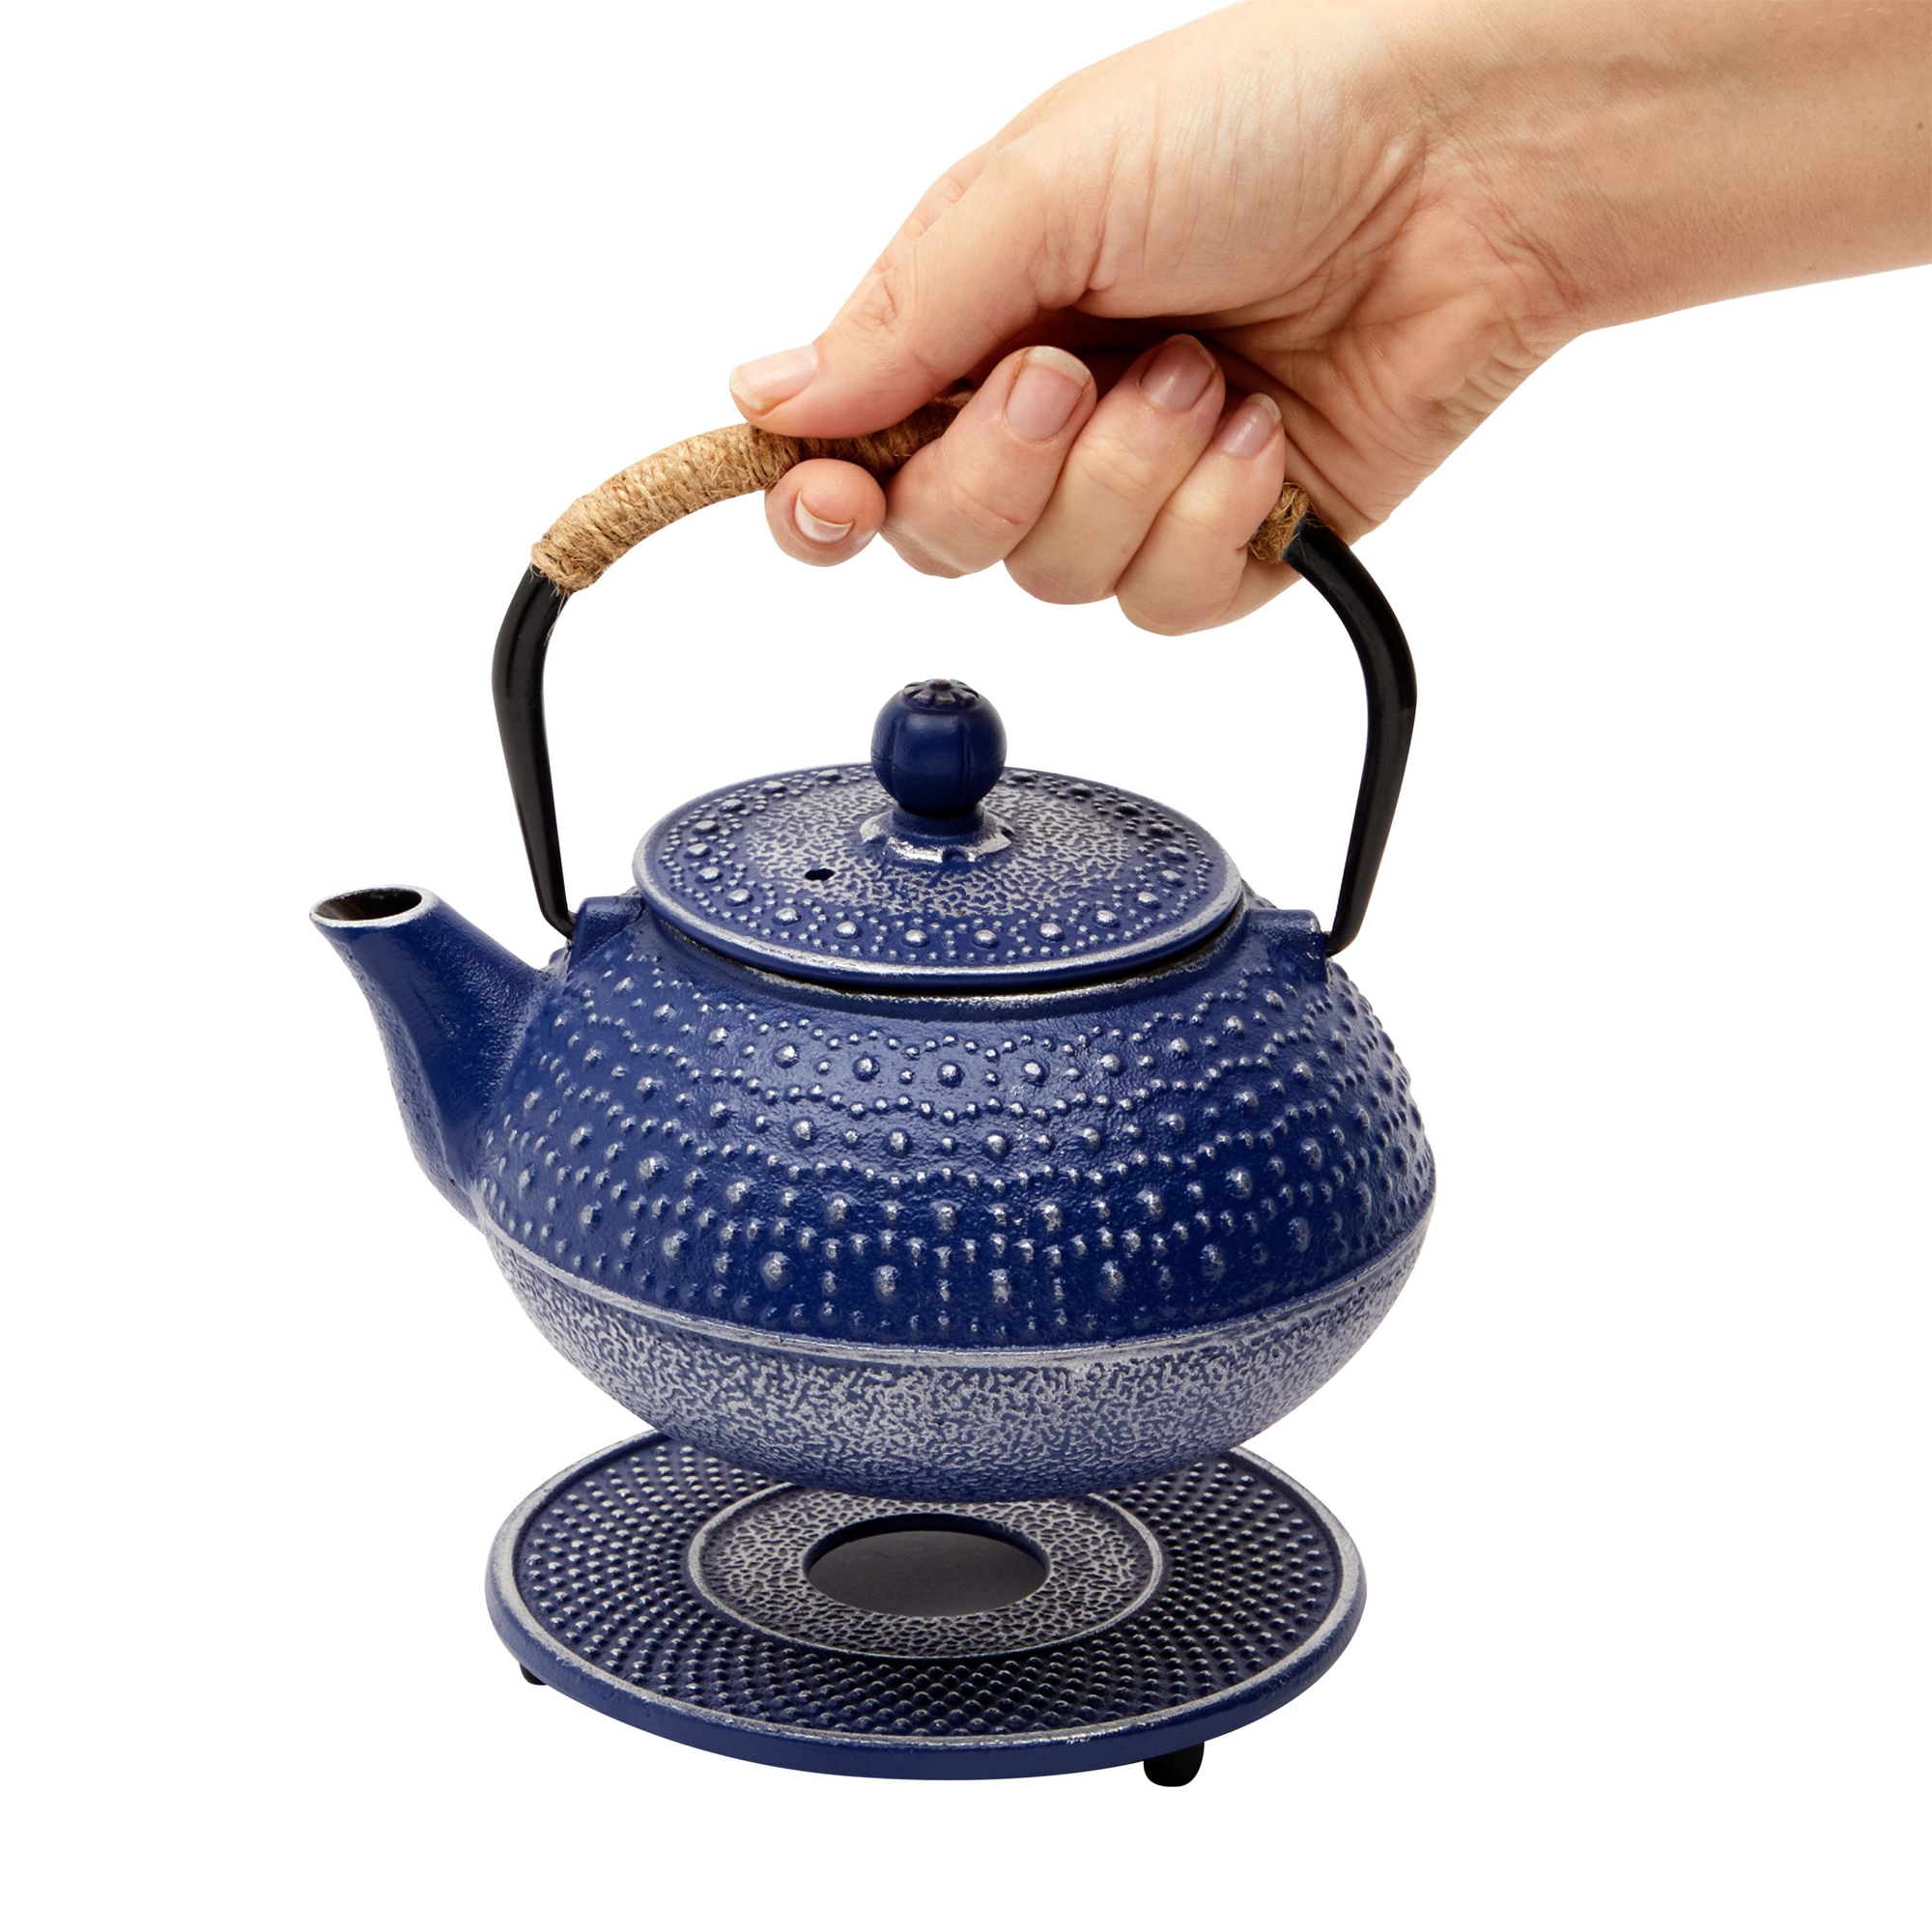 Cast Iron Teapot with Infuser - Japanese Tea Kettle, Loose Leaf Tetsubin with Handle and Trivet (Blue, 3 Pcs, holds 27 oz, 800 ml) - image 4 of 10